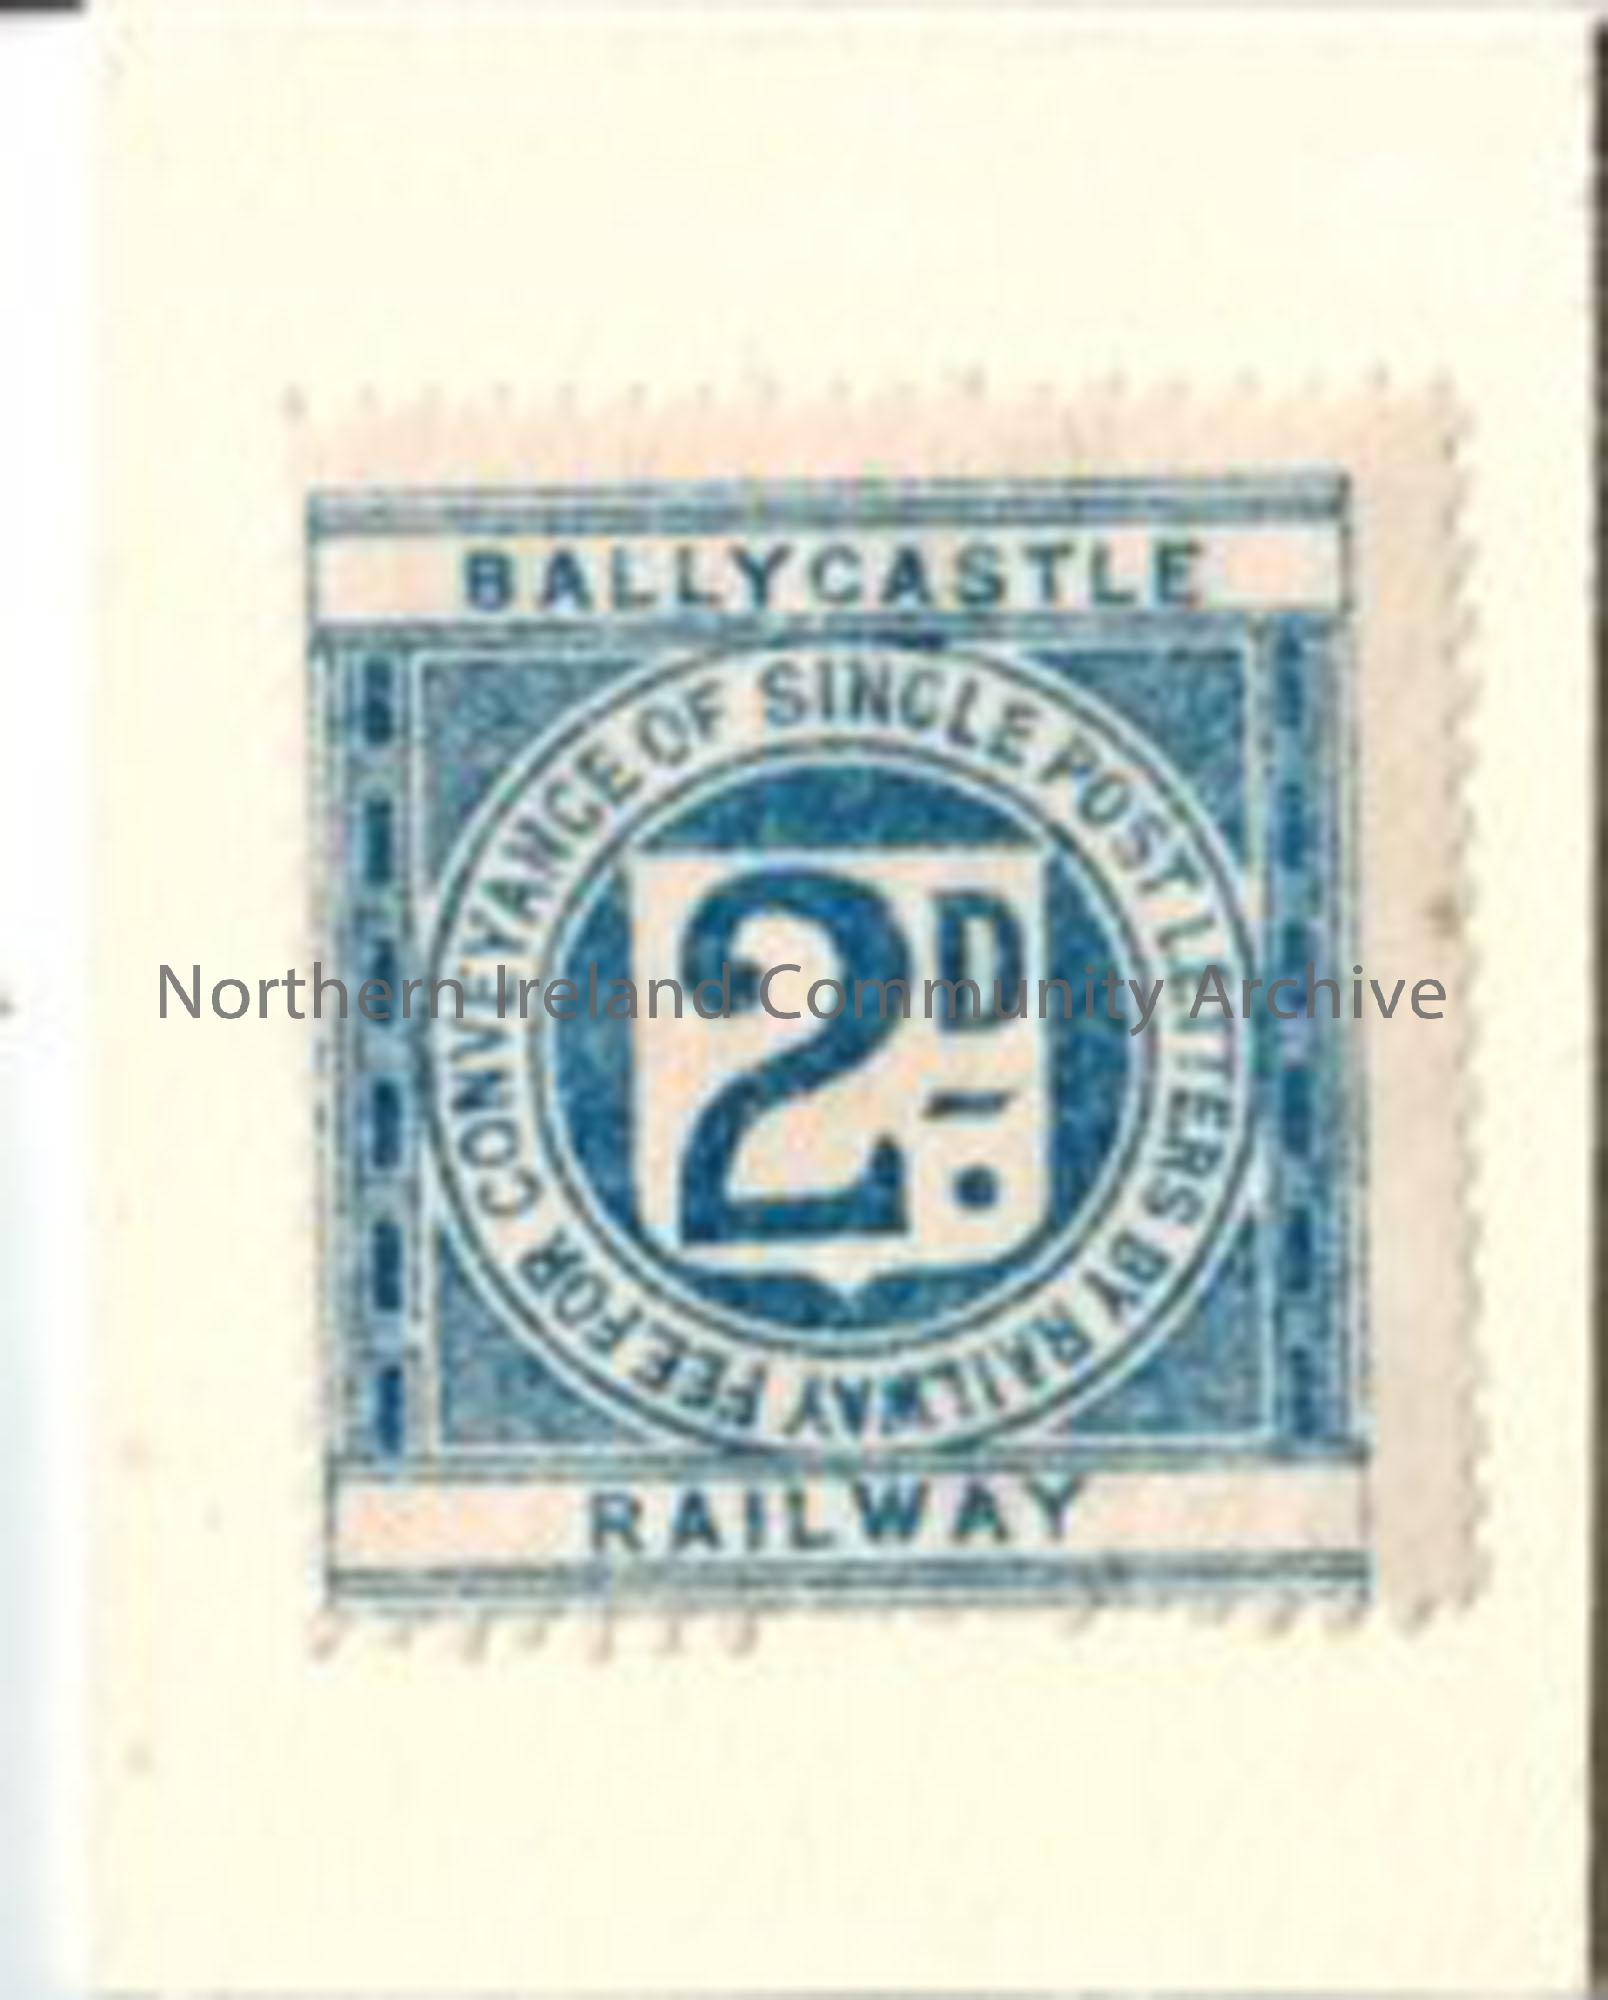 Ballycastle Railway stamp- 2D. ‘Fee for conveyance of single post letters by Railway. The stamp is blue and white.